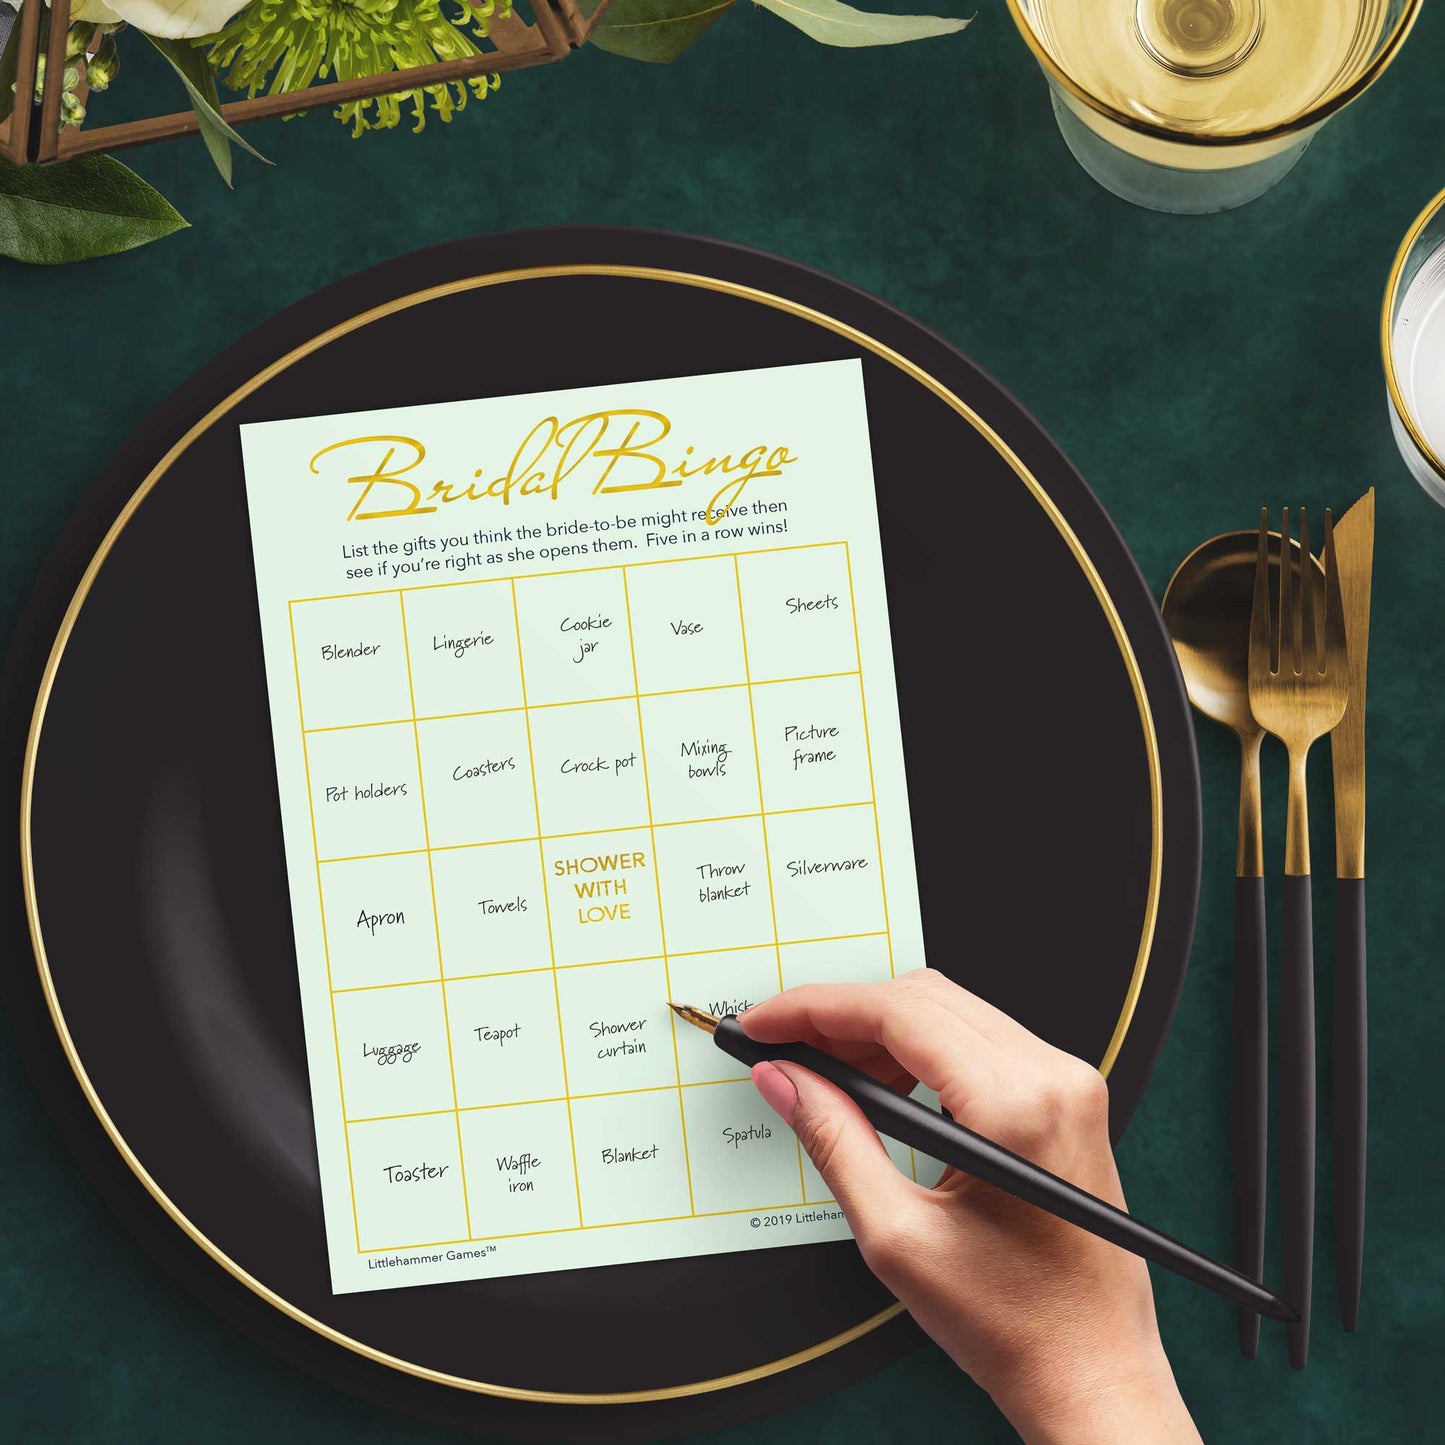 Woman with a pen sitting at a dark place setting with a black and gold plate filling out a mint and gold Bridal Gift Bingo card